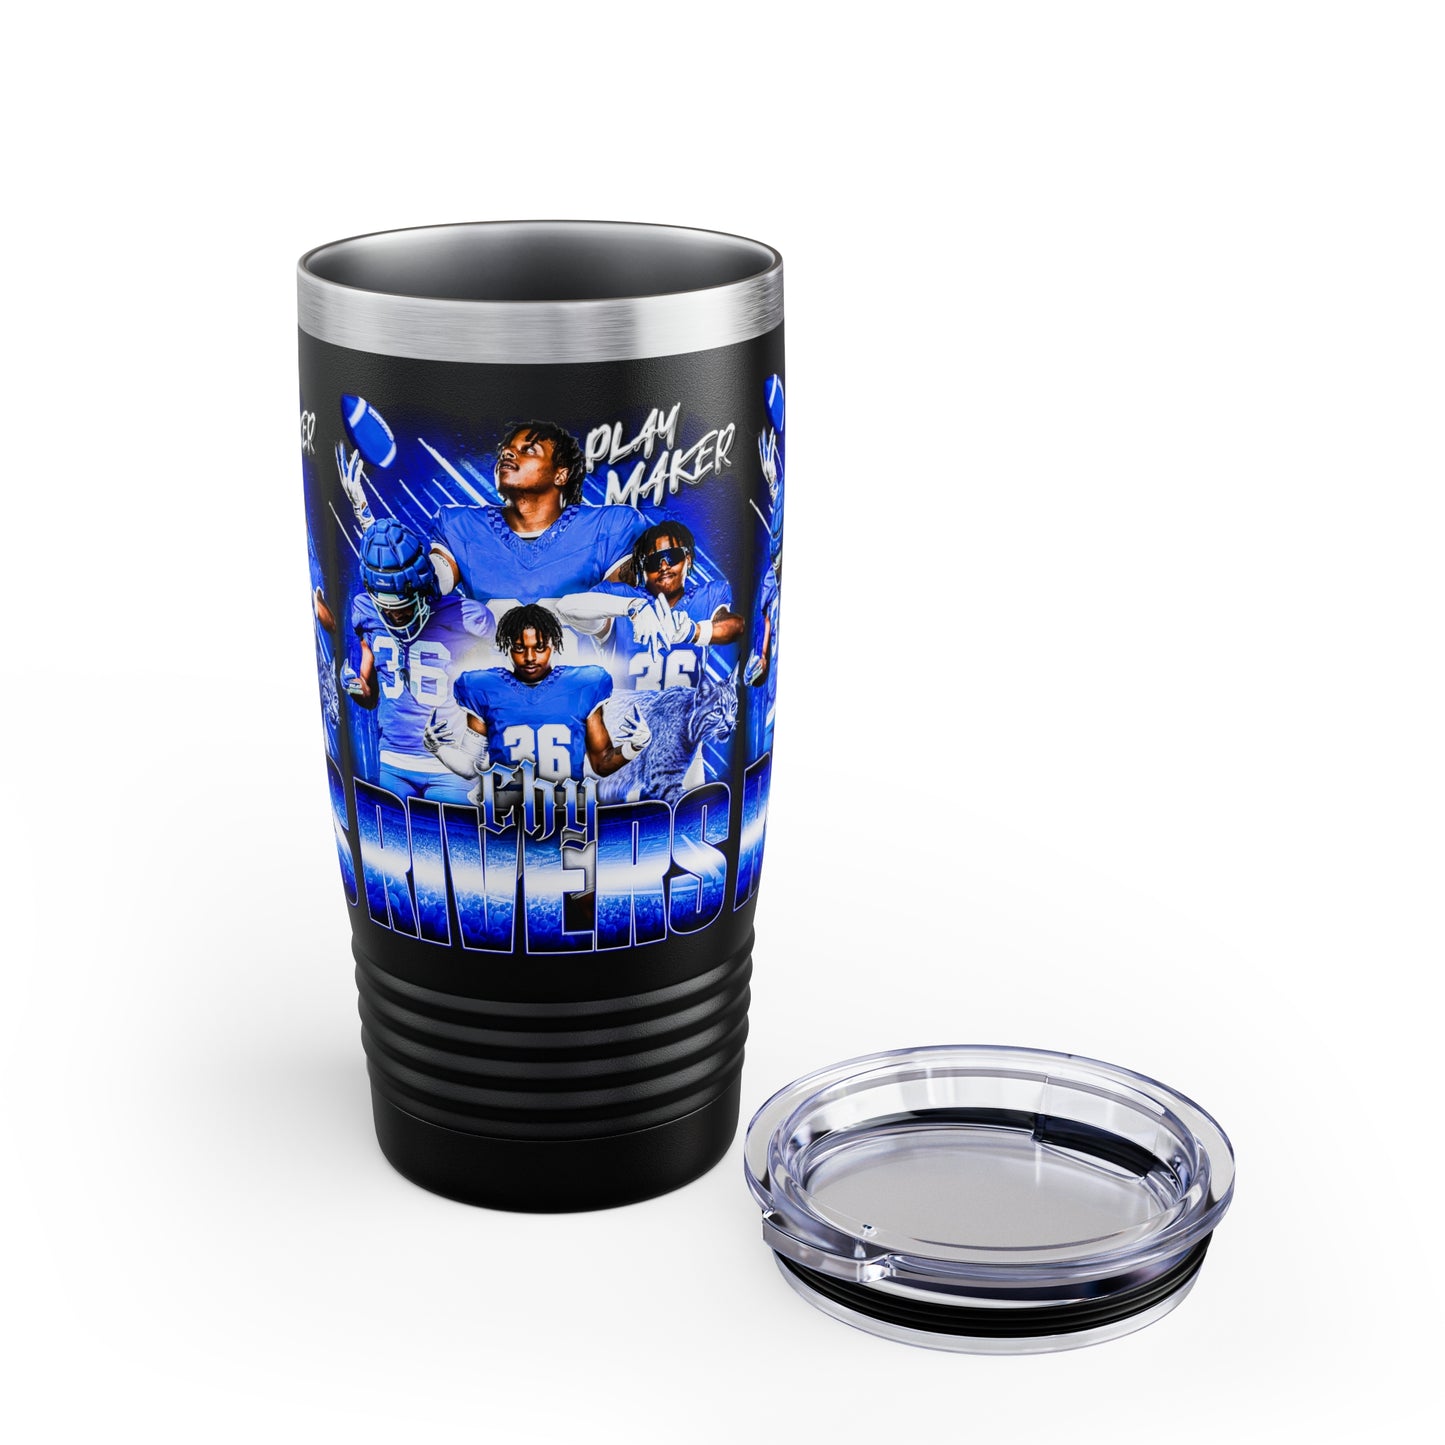 CHY RIVERS STAINLESS STEEL TUMBLER